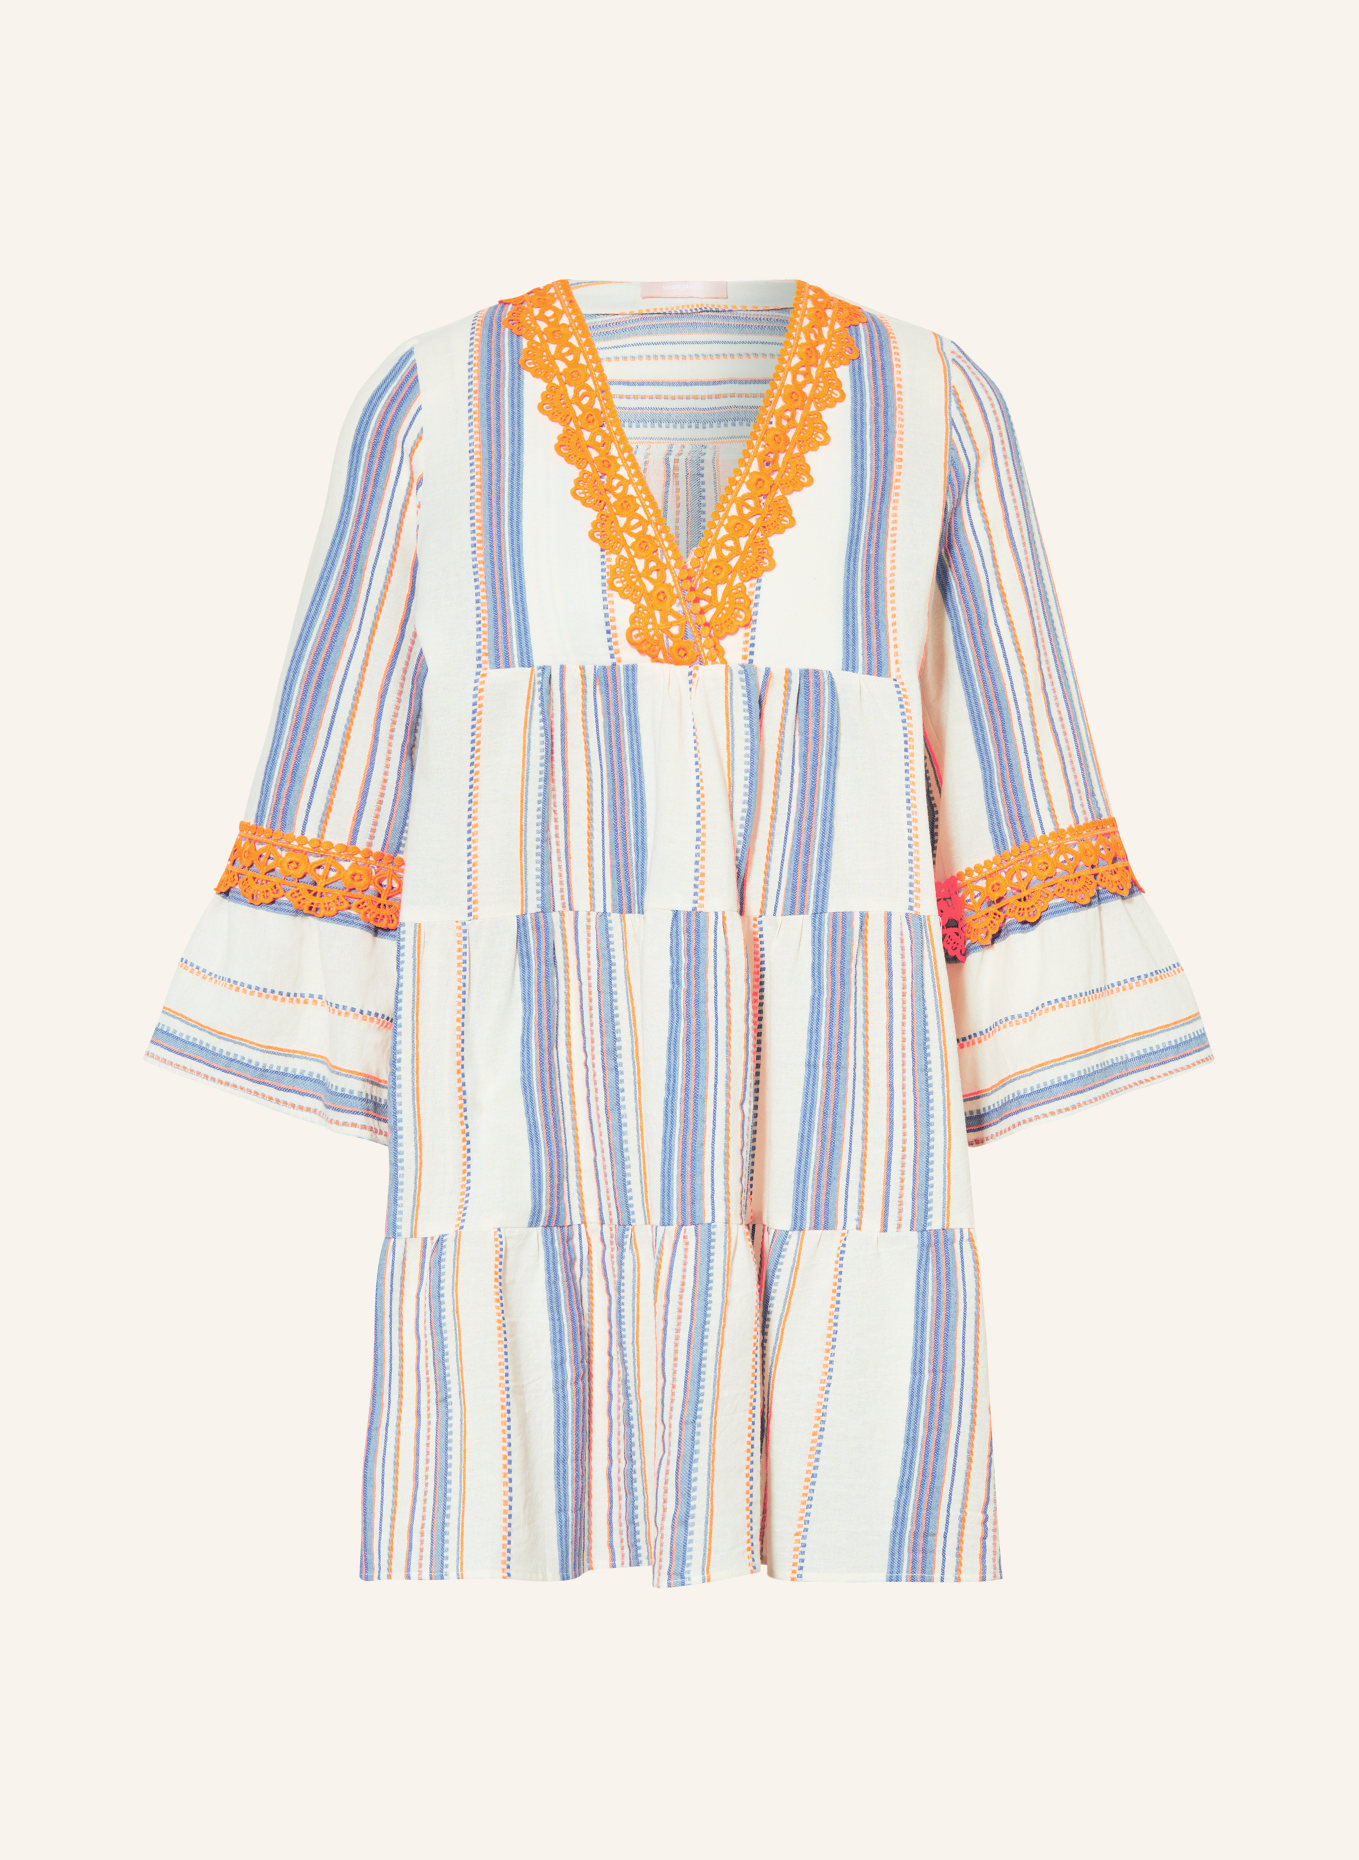 VALÉRIE KHALFON Dress NIGGY with 3/4 sleeves and lace, Color: BLUE/ ORANGE/ CREAM (Image 1)